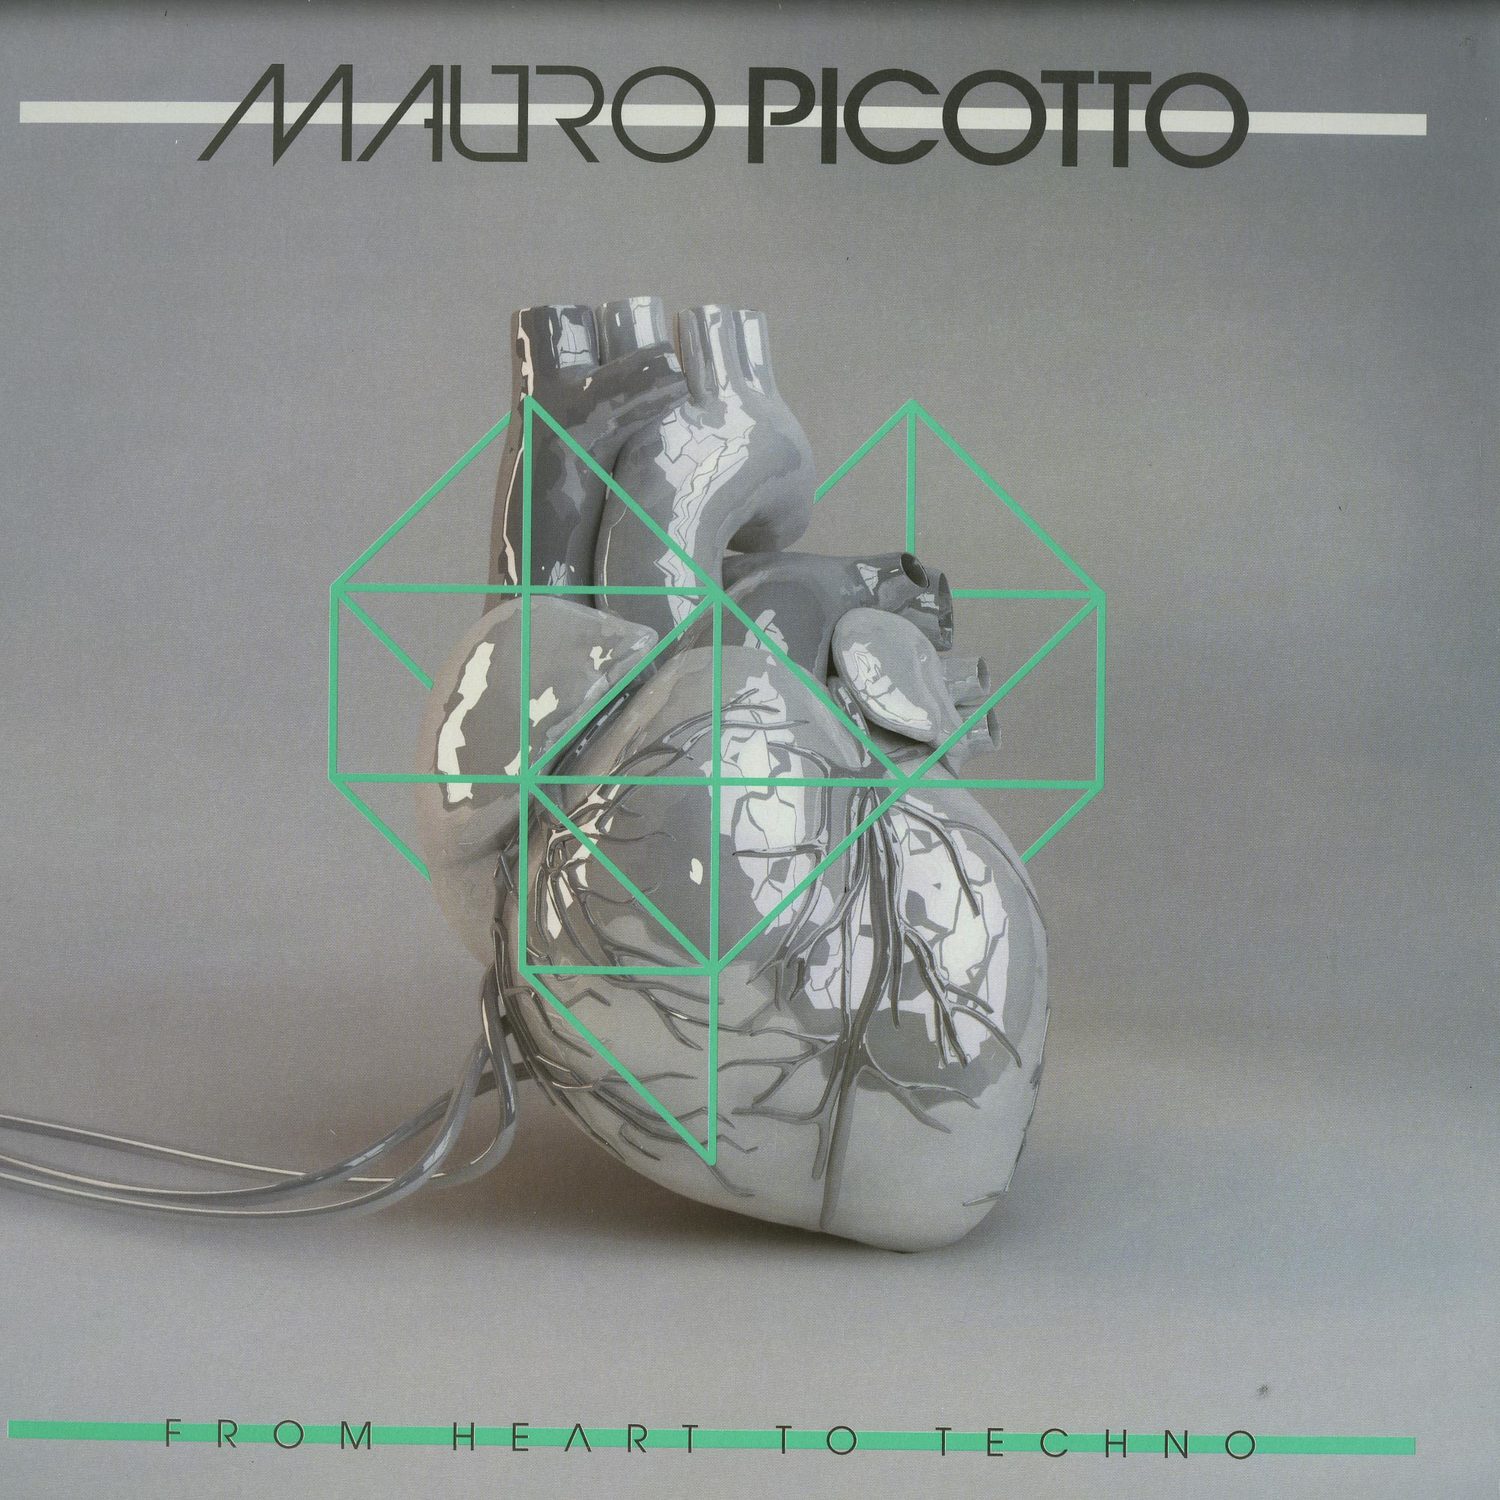 Mauro Picotto - FROM HEART TO TECHNO